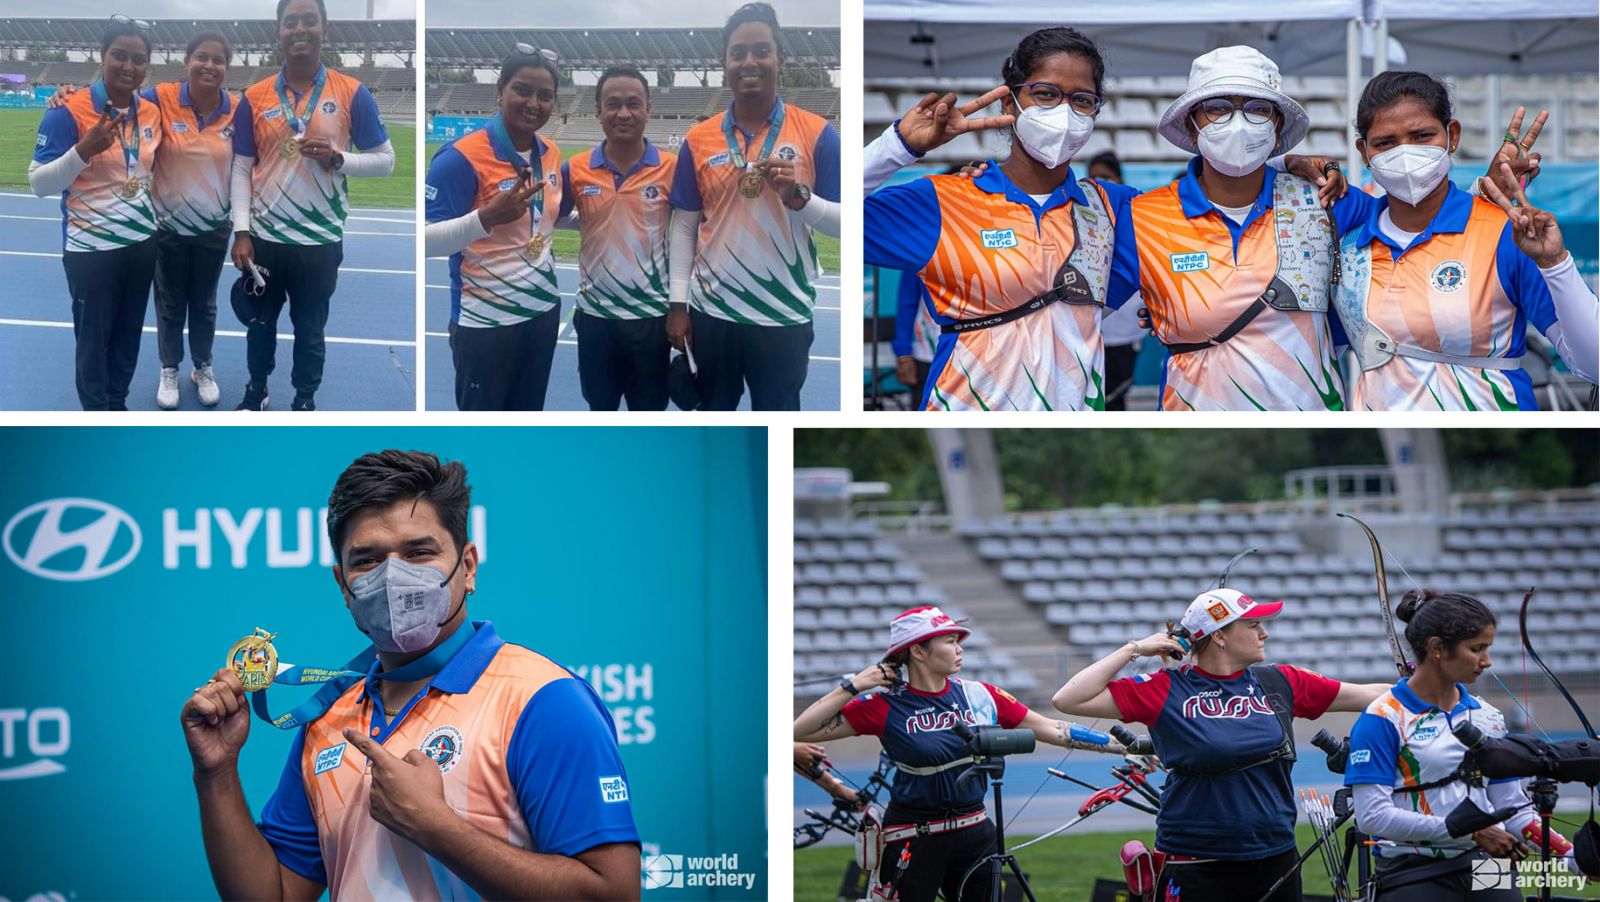 NTPC, the official supporting partner of Indian Archery team congratulates them for stellar performance